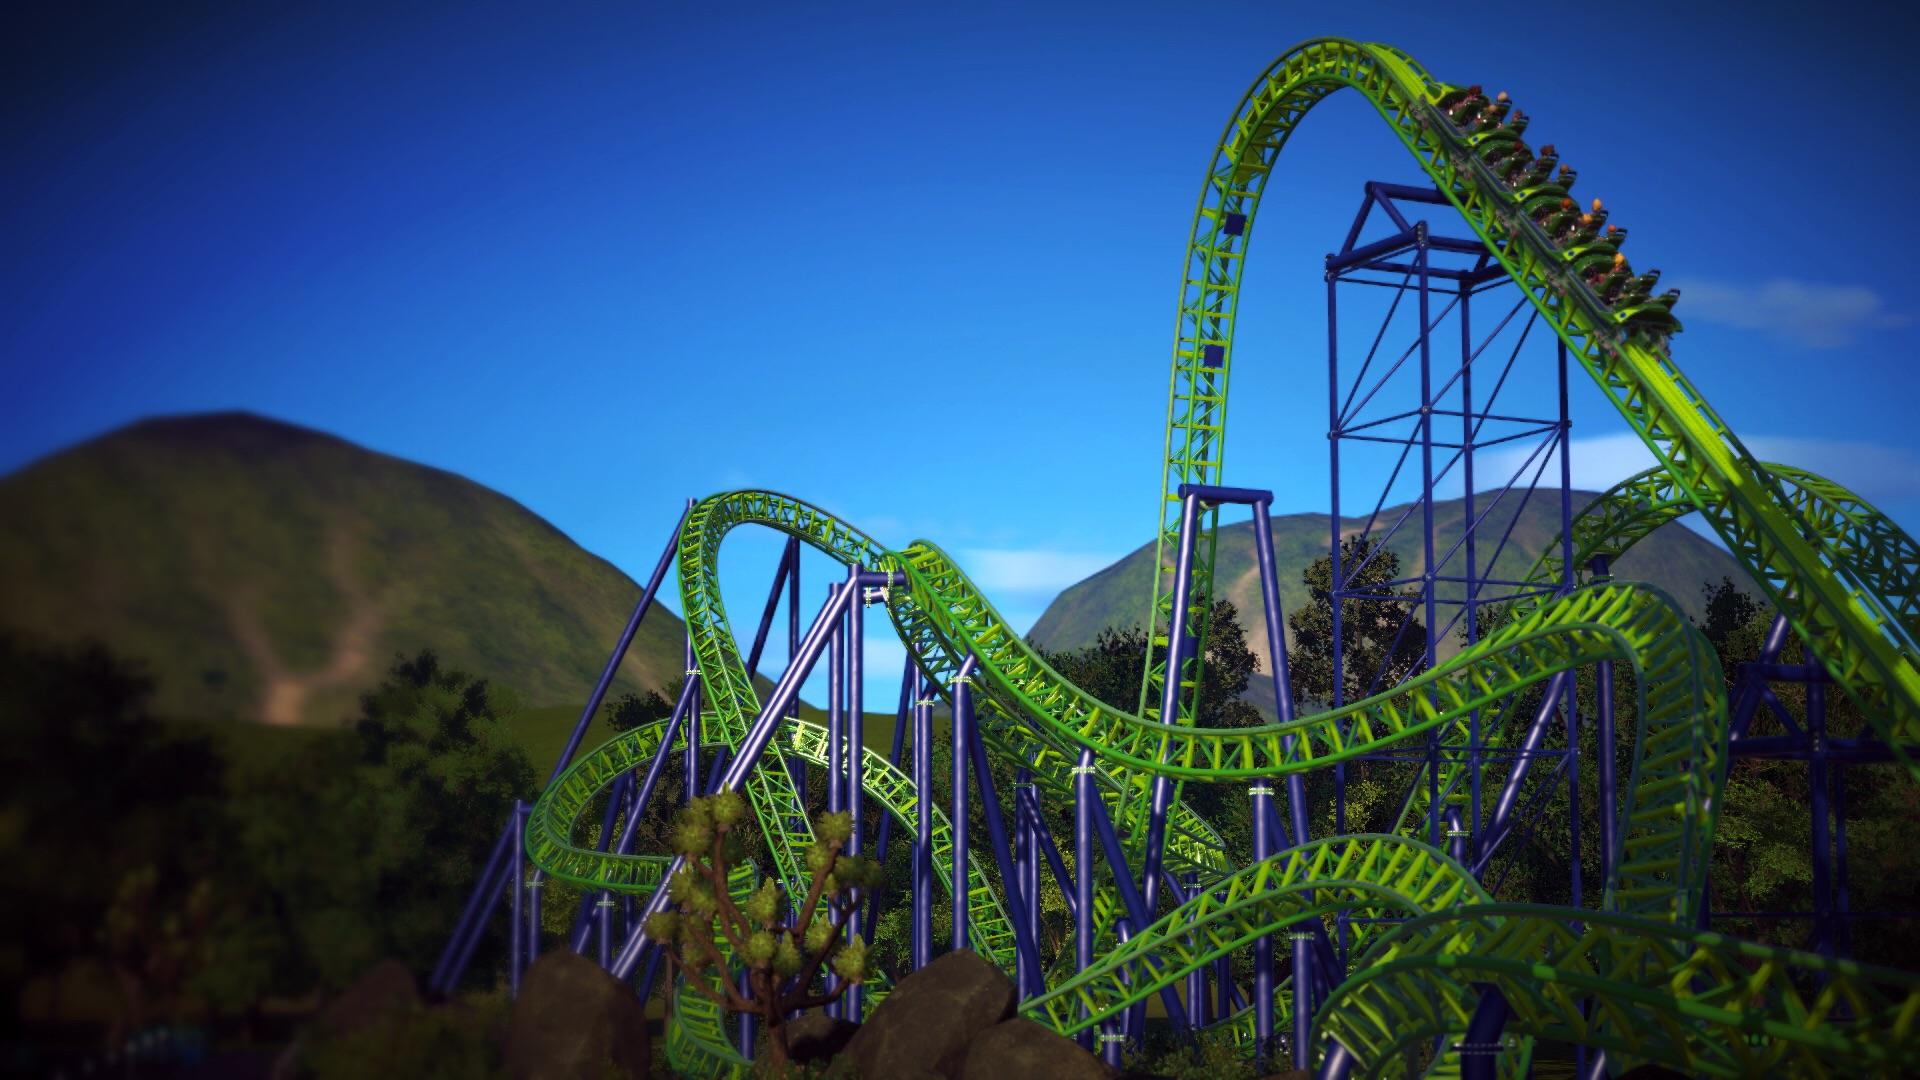 HELIX Update: This little spaghetti coaster is made for everyone! I really enjoy building this park. It's coming along nicely :)